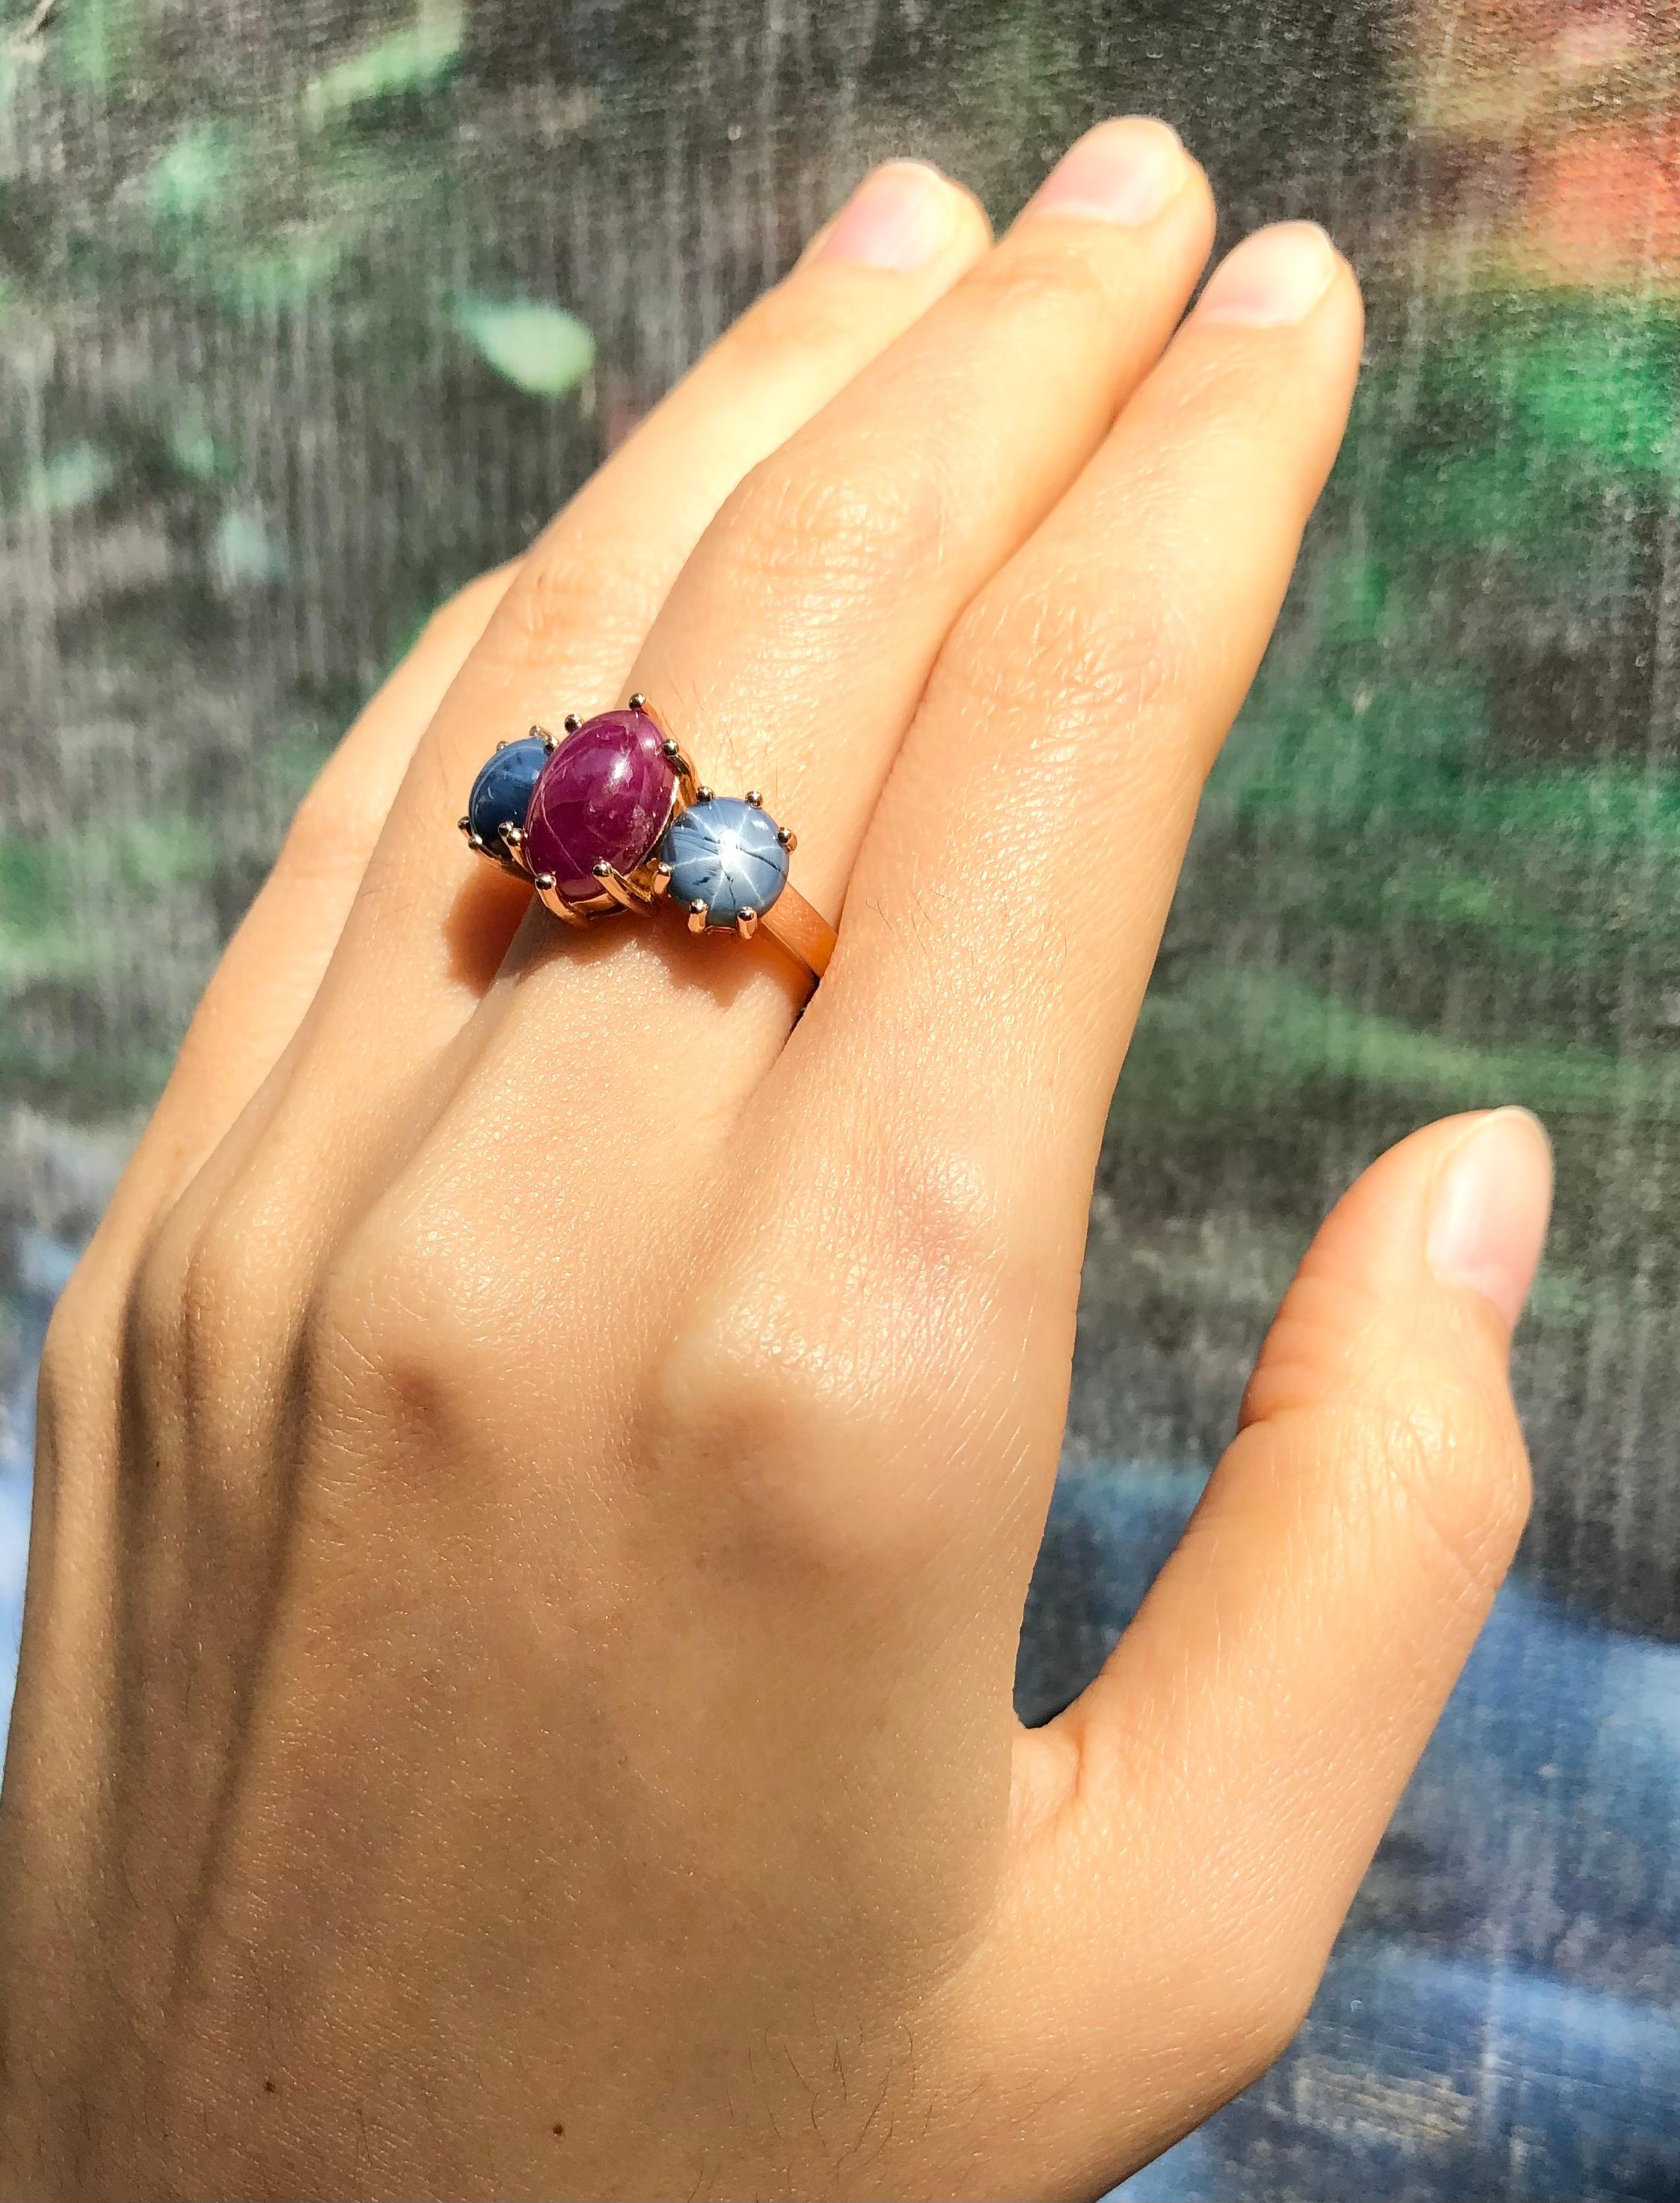 Star Ruby 3.68 carats with Blue Star Sapphire 3.72 carats Ring set 18 Karat Rose Gold Settings

Width:  2.0 cm 
Length: 1.1 cm
Ring Size: 53
Total Weight: 7.15 grams

